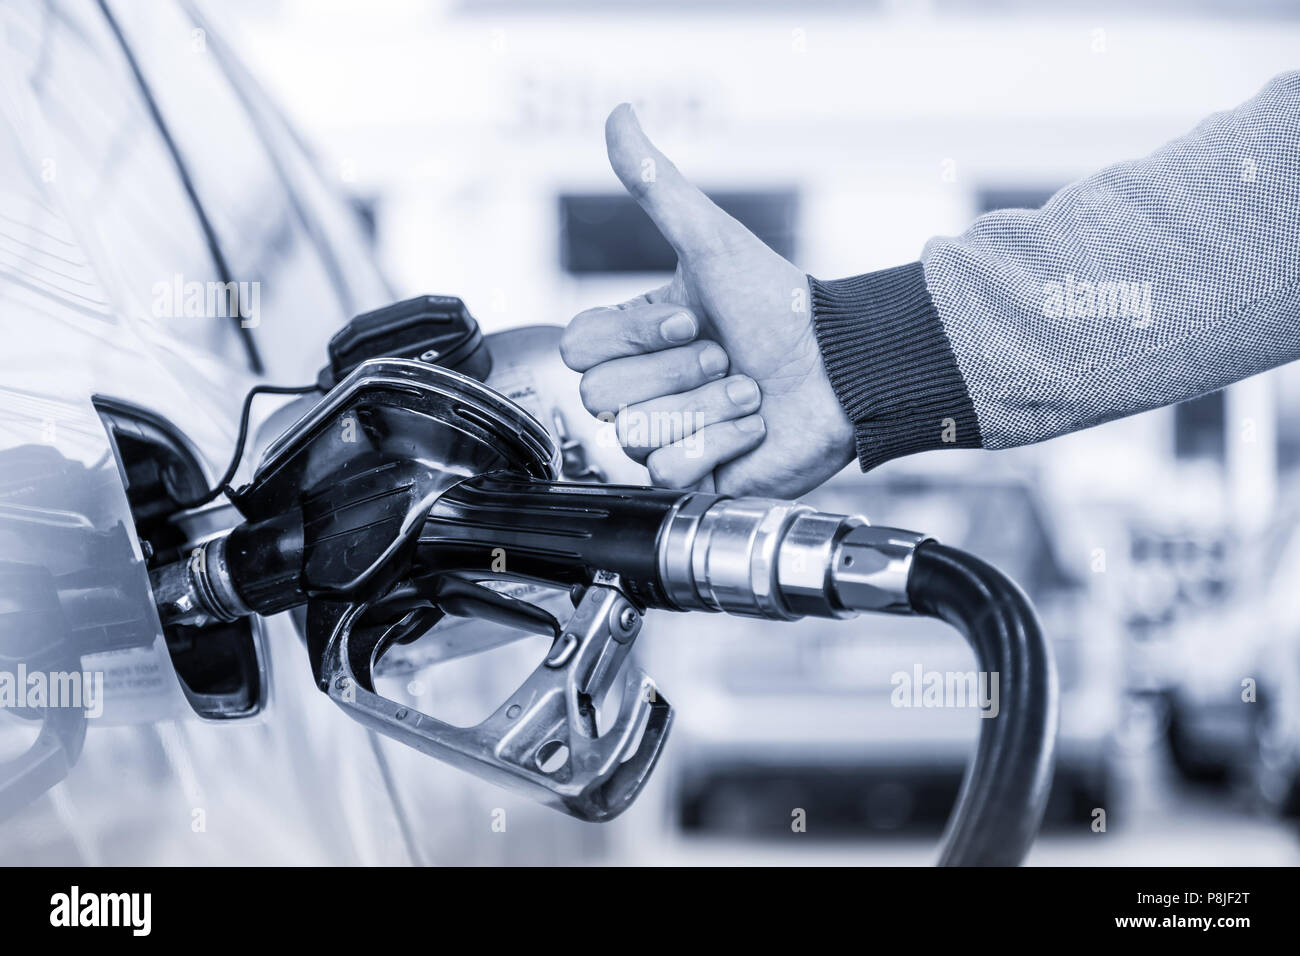 Petrol or gasoline being pumped into a motor vehicle car. Closeup of man, showing thumb up gesture, pumping gasoline fuel in car at gas station. Stock Photo